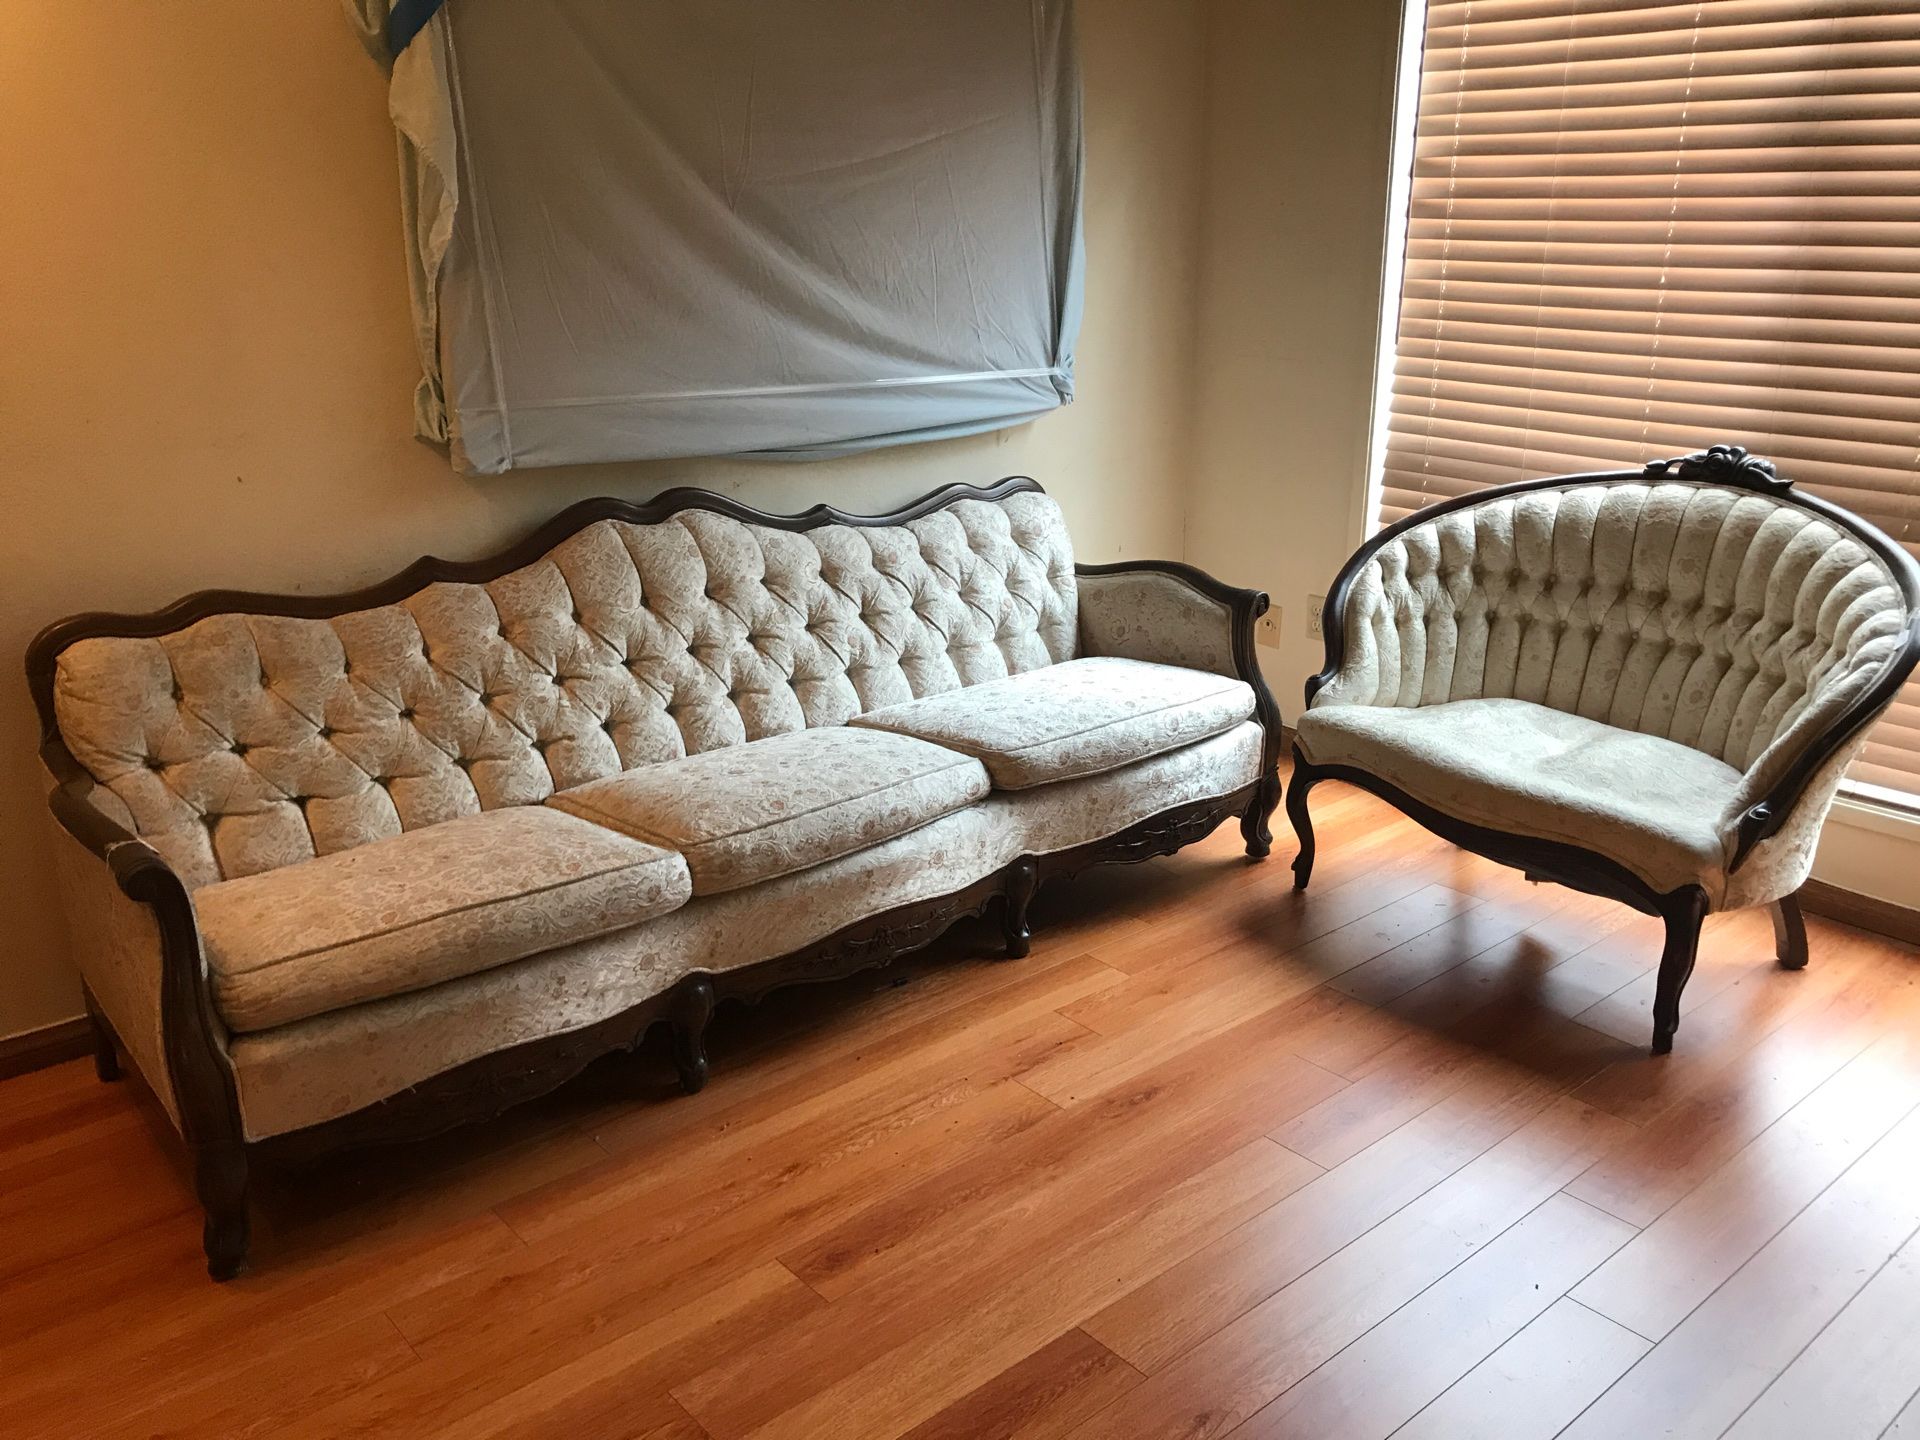 Antique chairs $100 for both